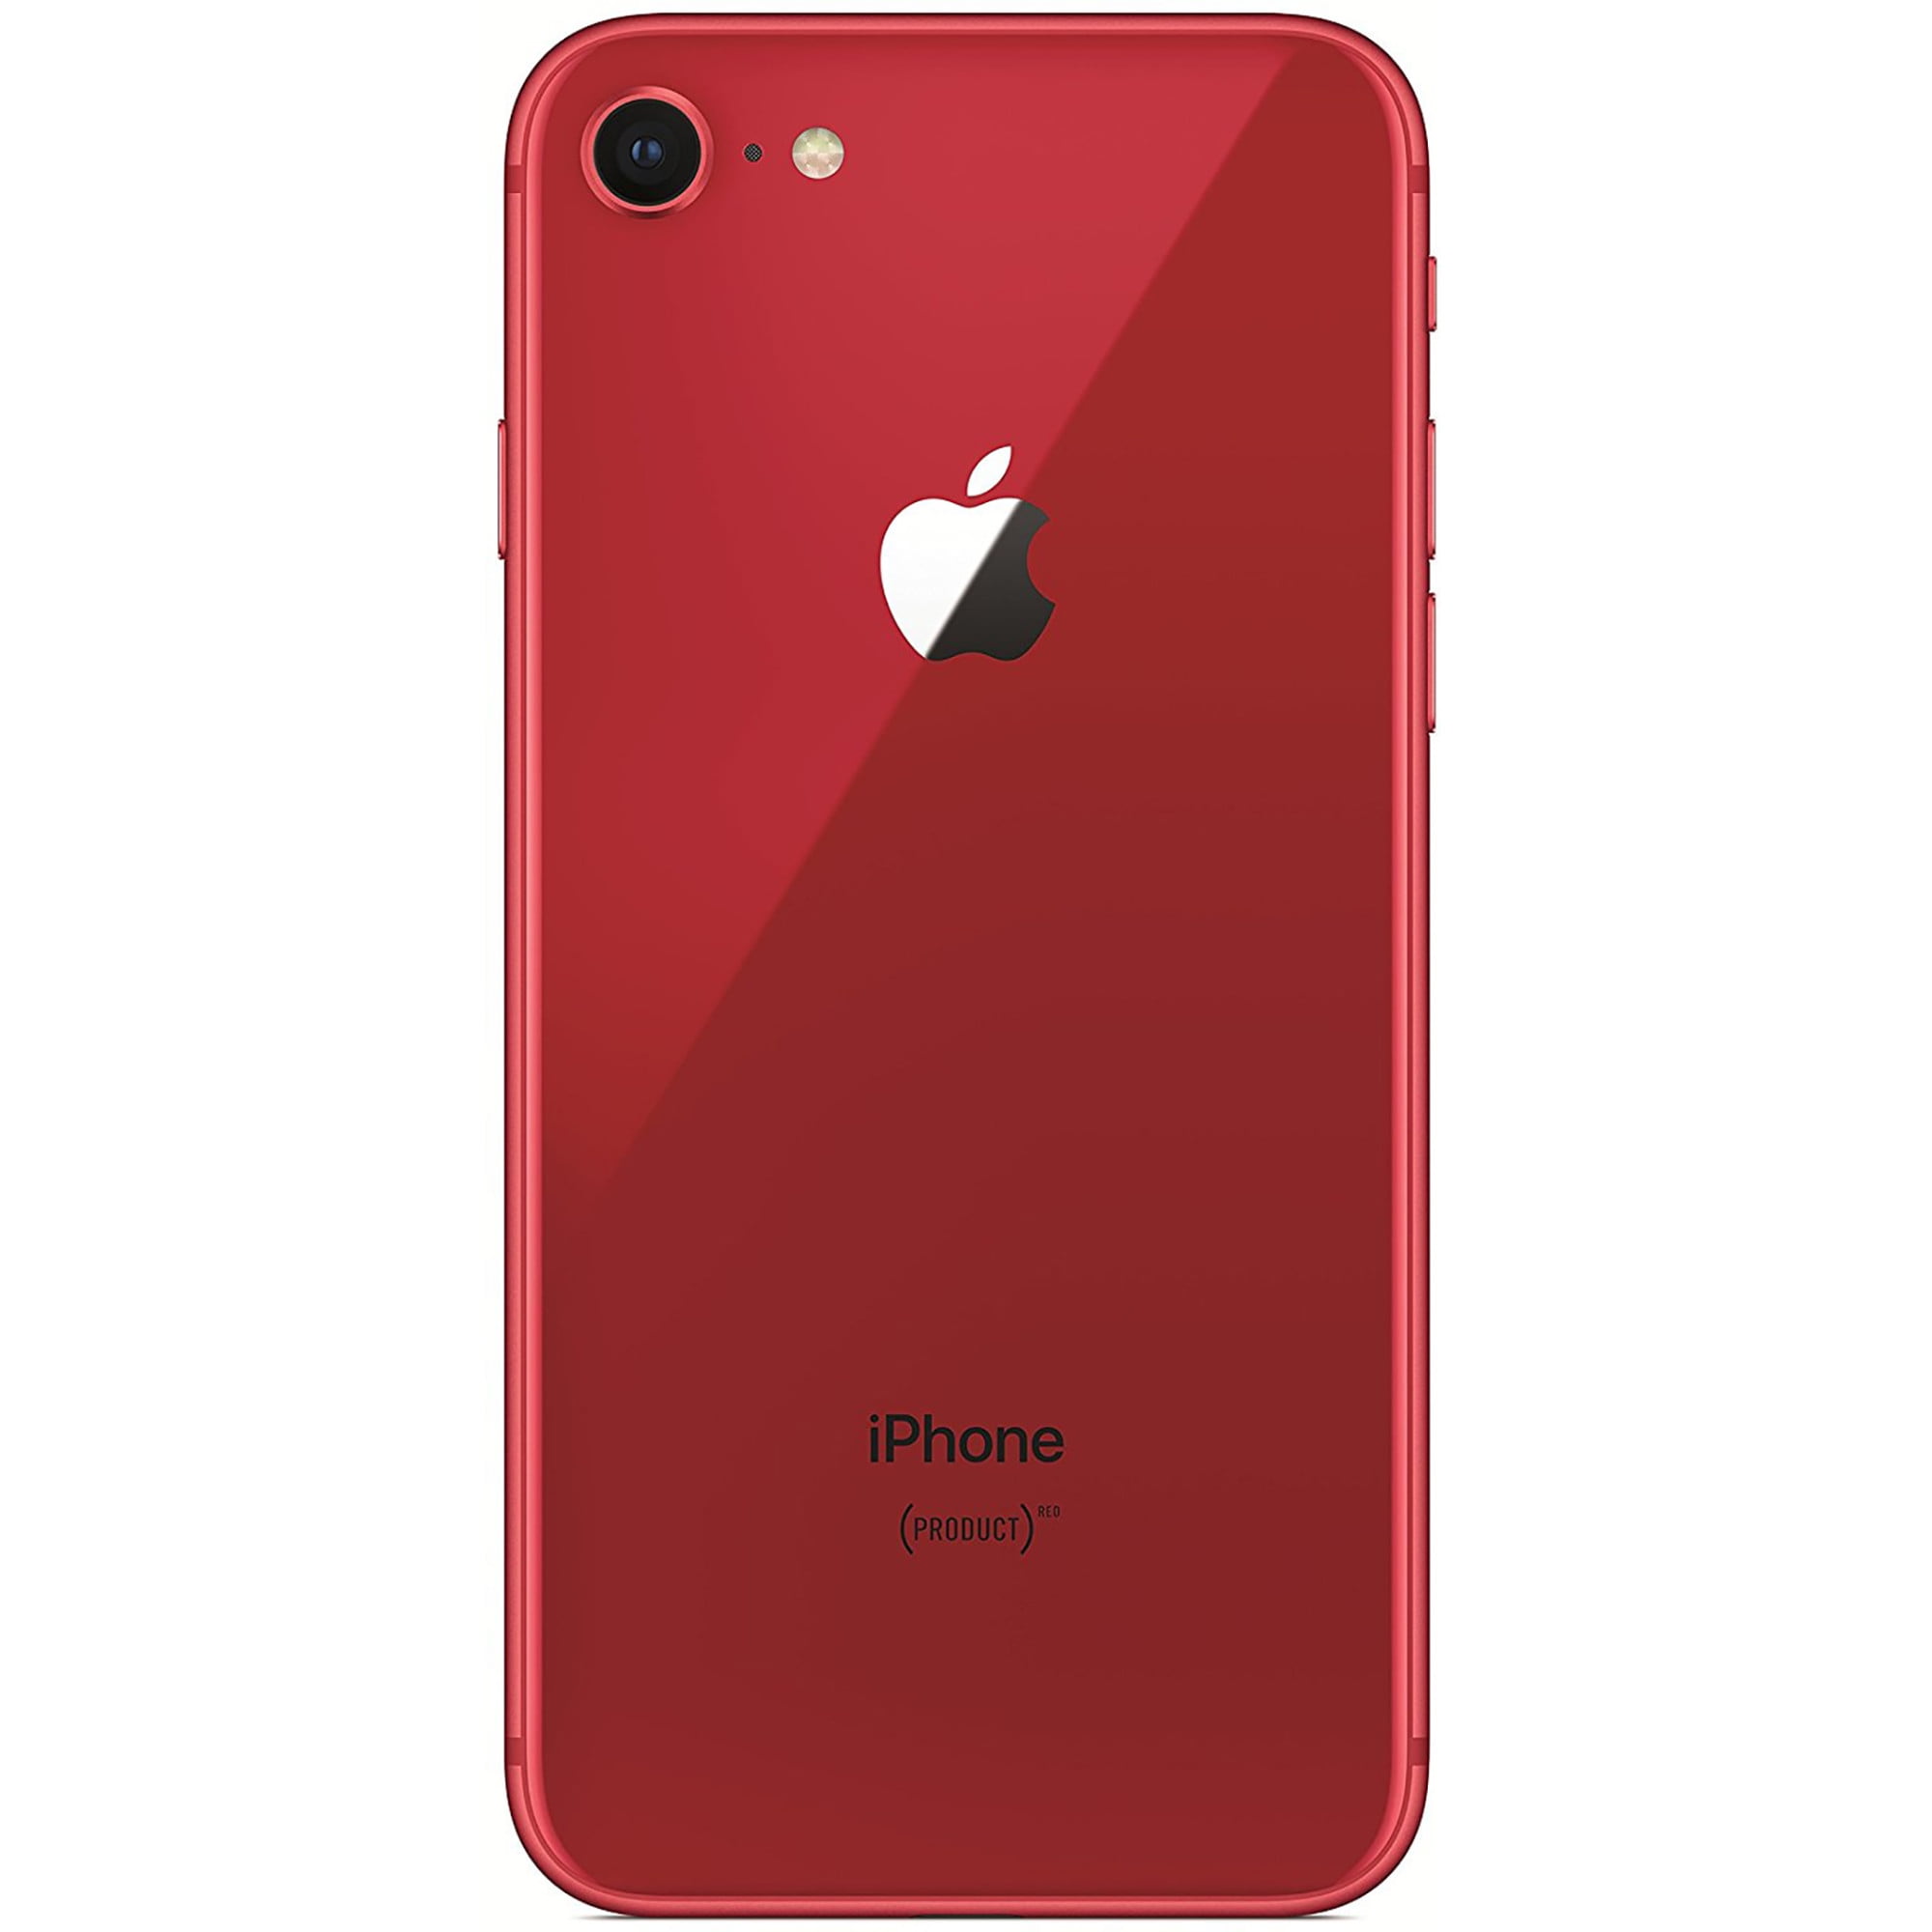 Apple iPhone 8 64GB Unlocked GSM 4G LTE Phone w/ 12MP Camera - Red (Used)